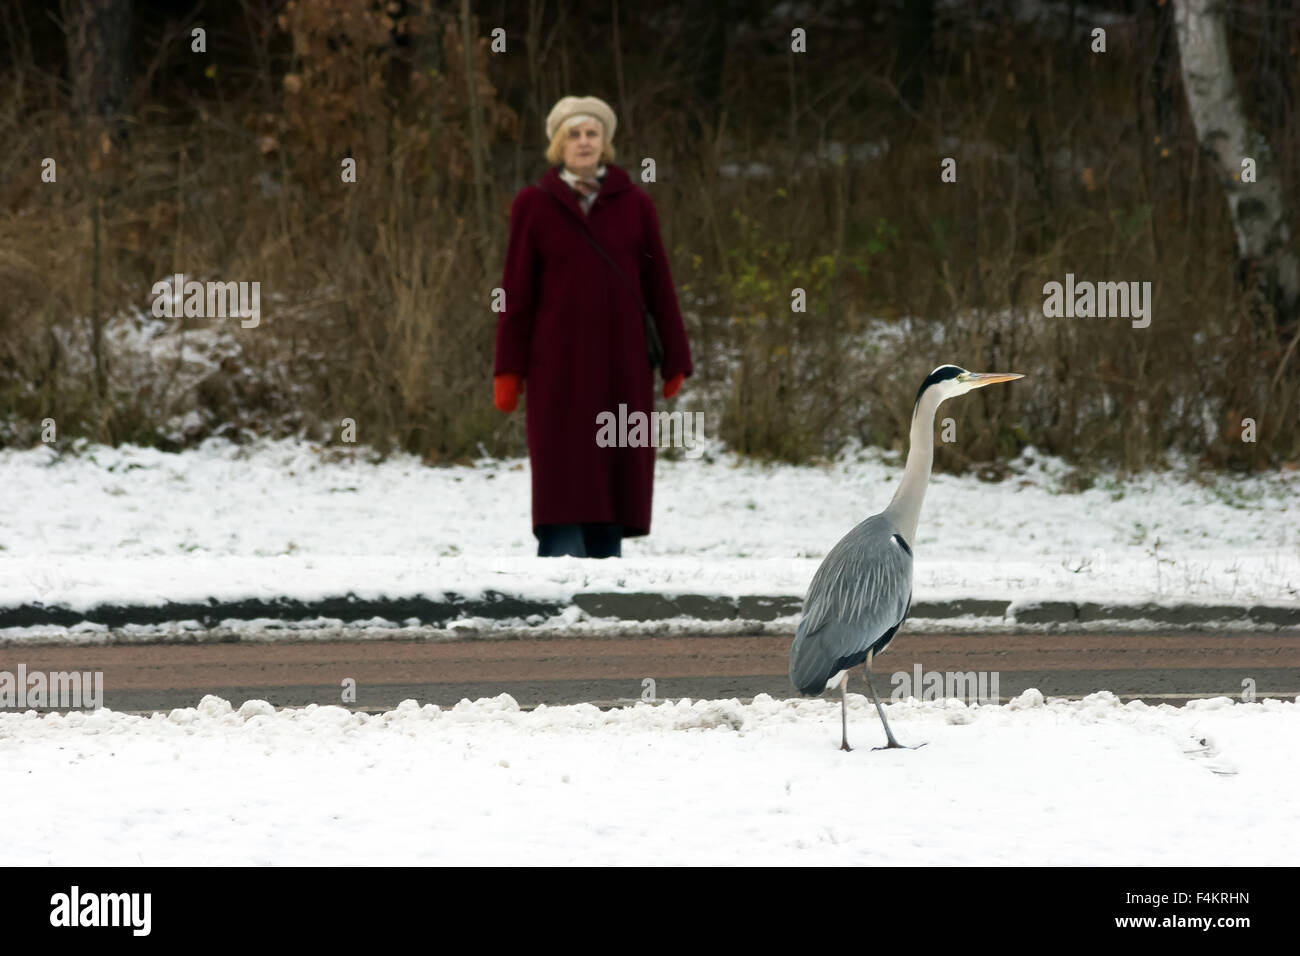 Face to Face with Grey Heron, Solna, Sweden Stock Photo